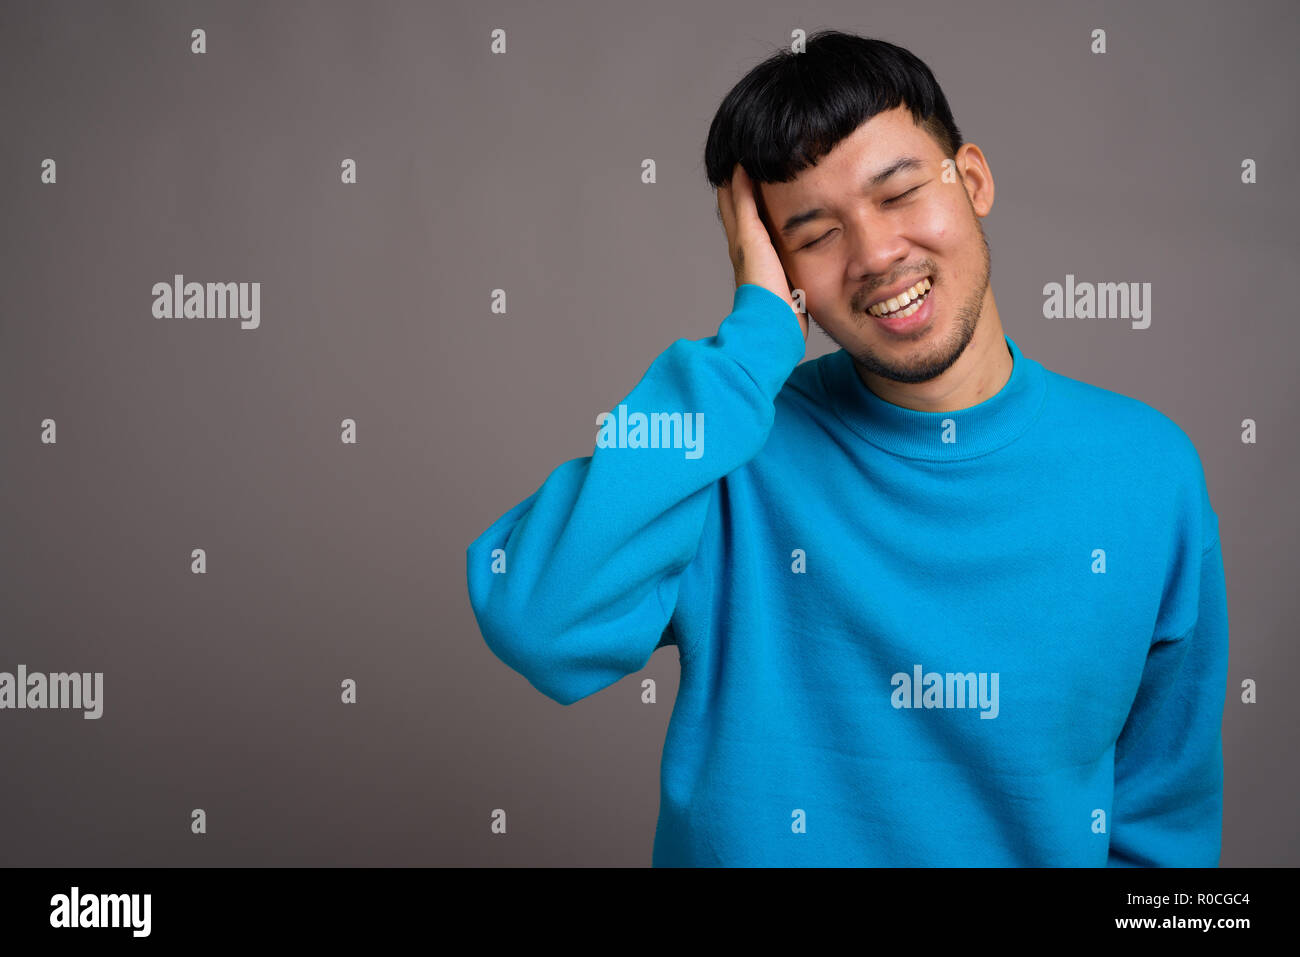 Portrait of young Asian man against gray background Stock Photo